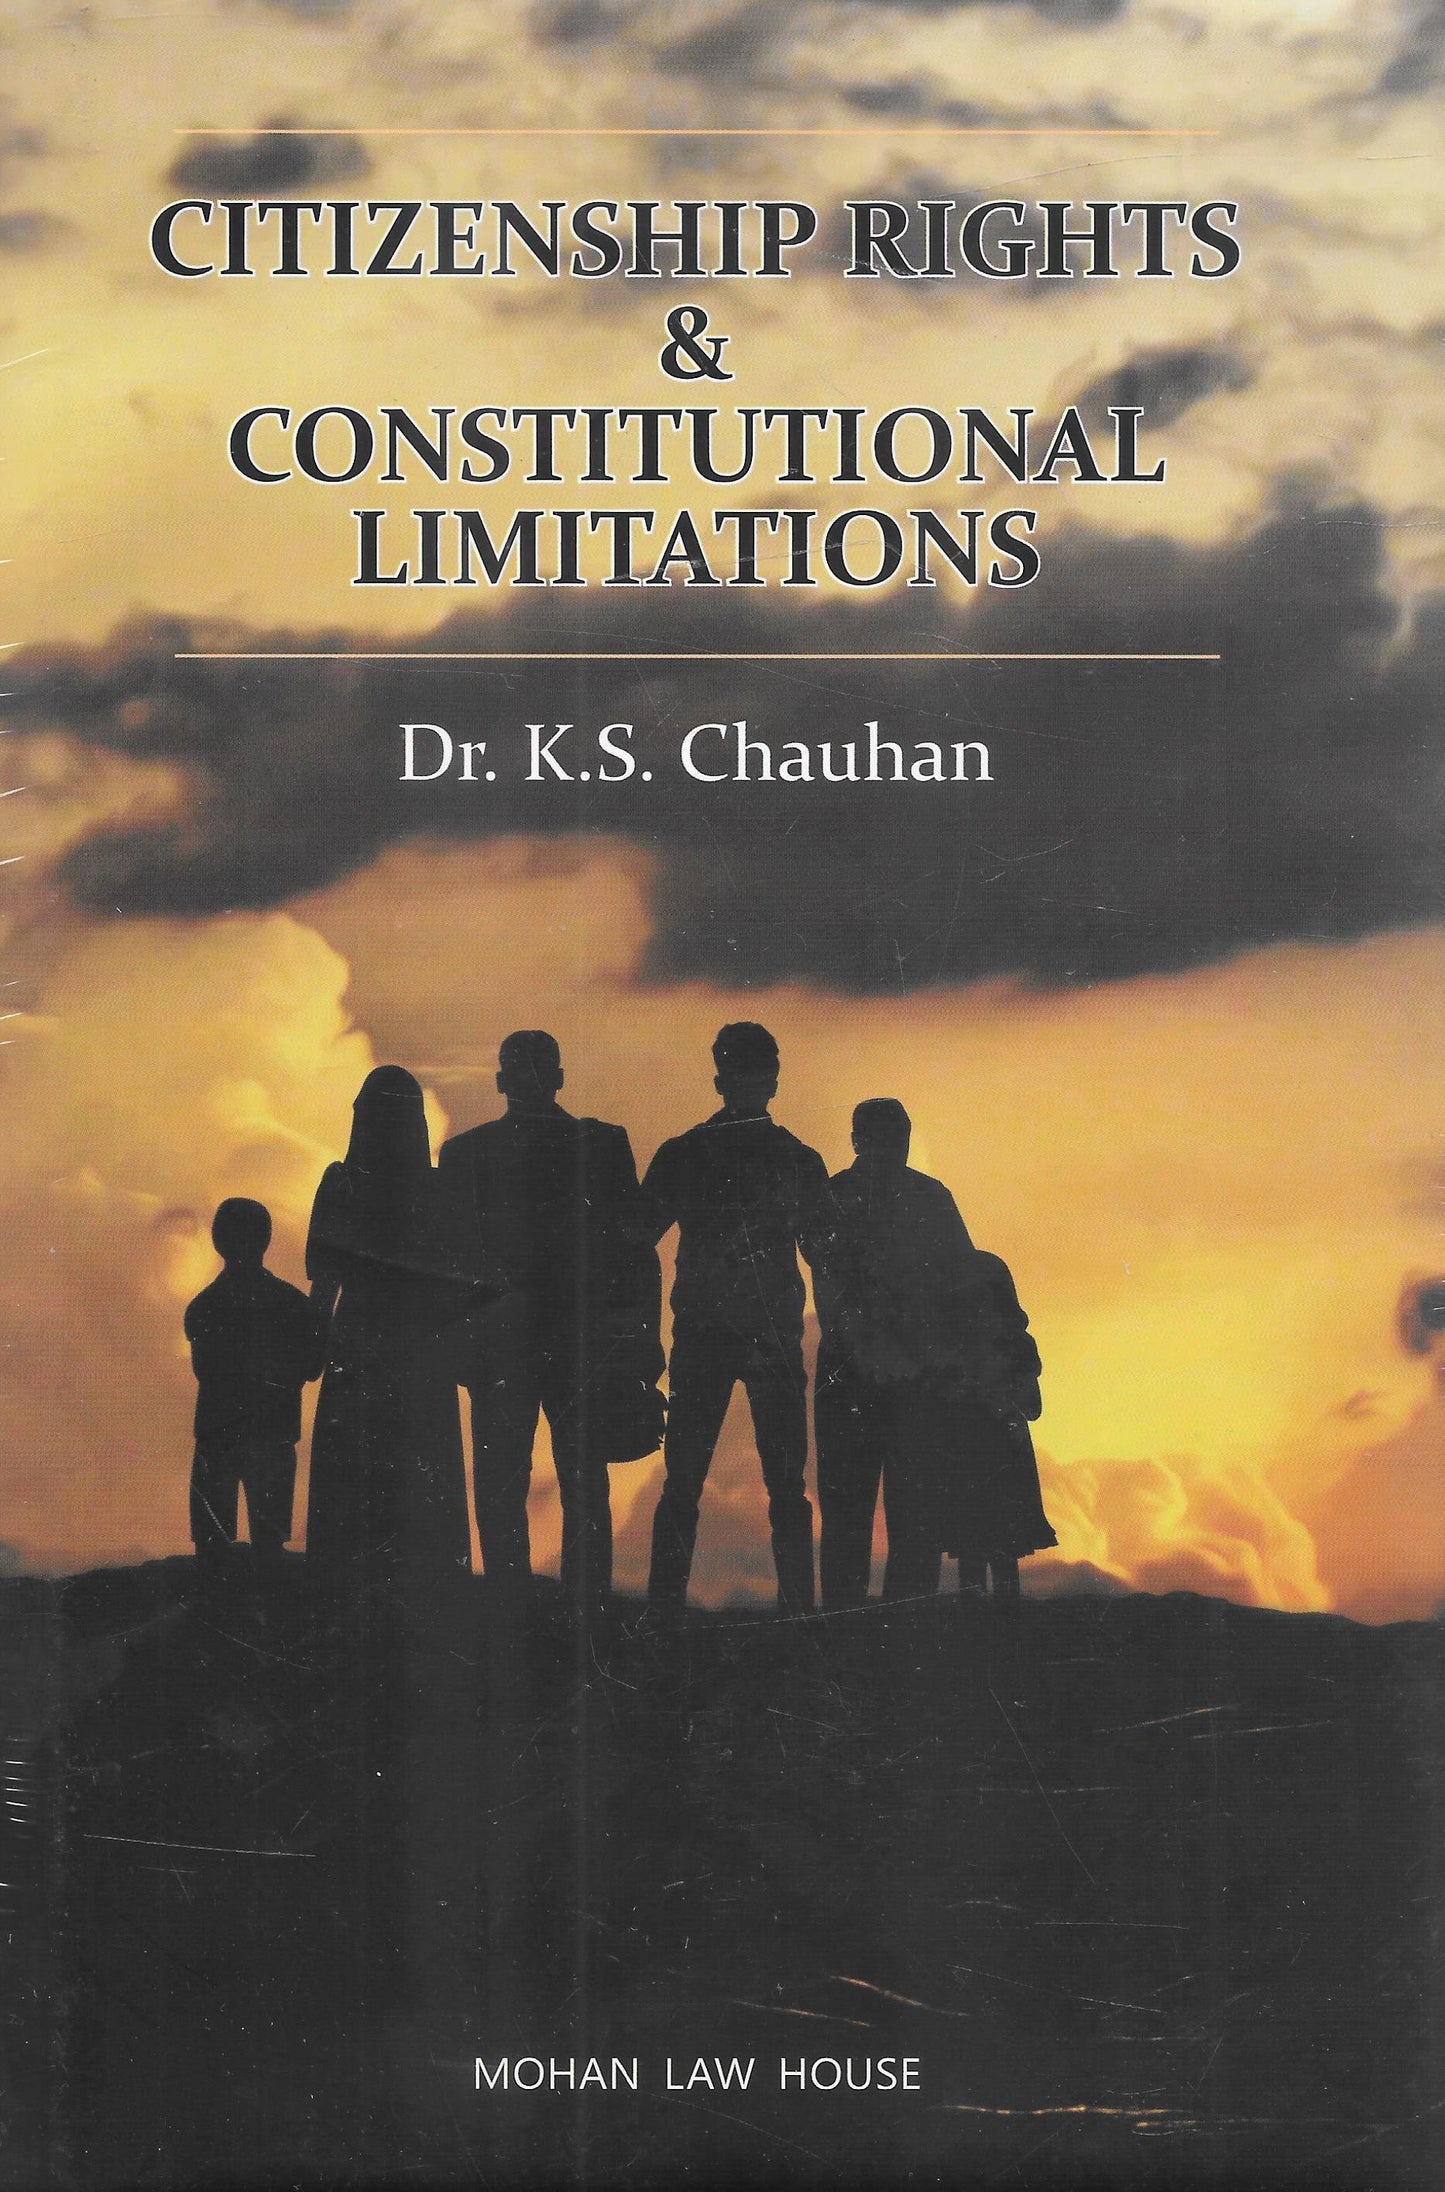 Citizenship Rights & Constitutional Limitations